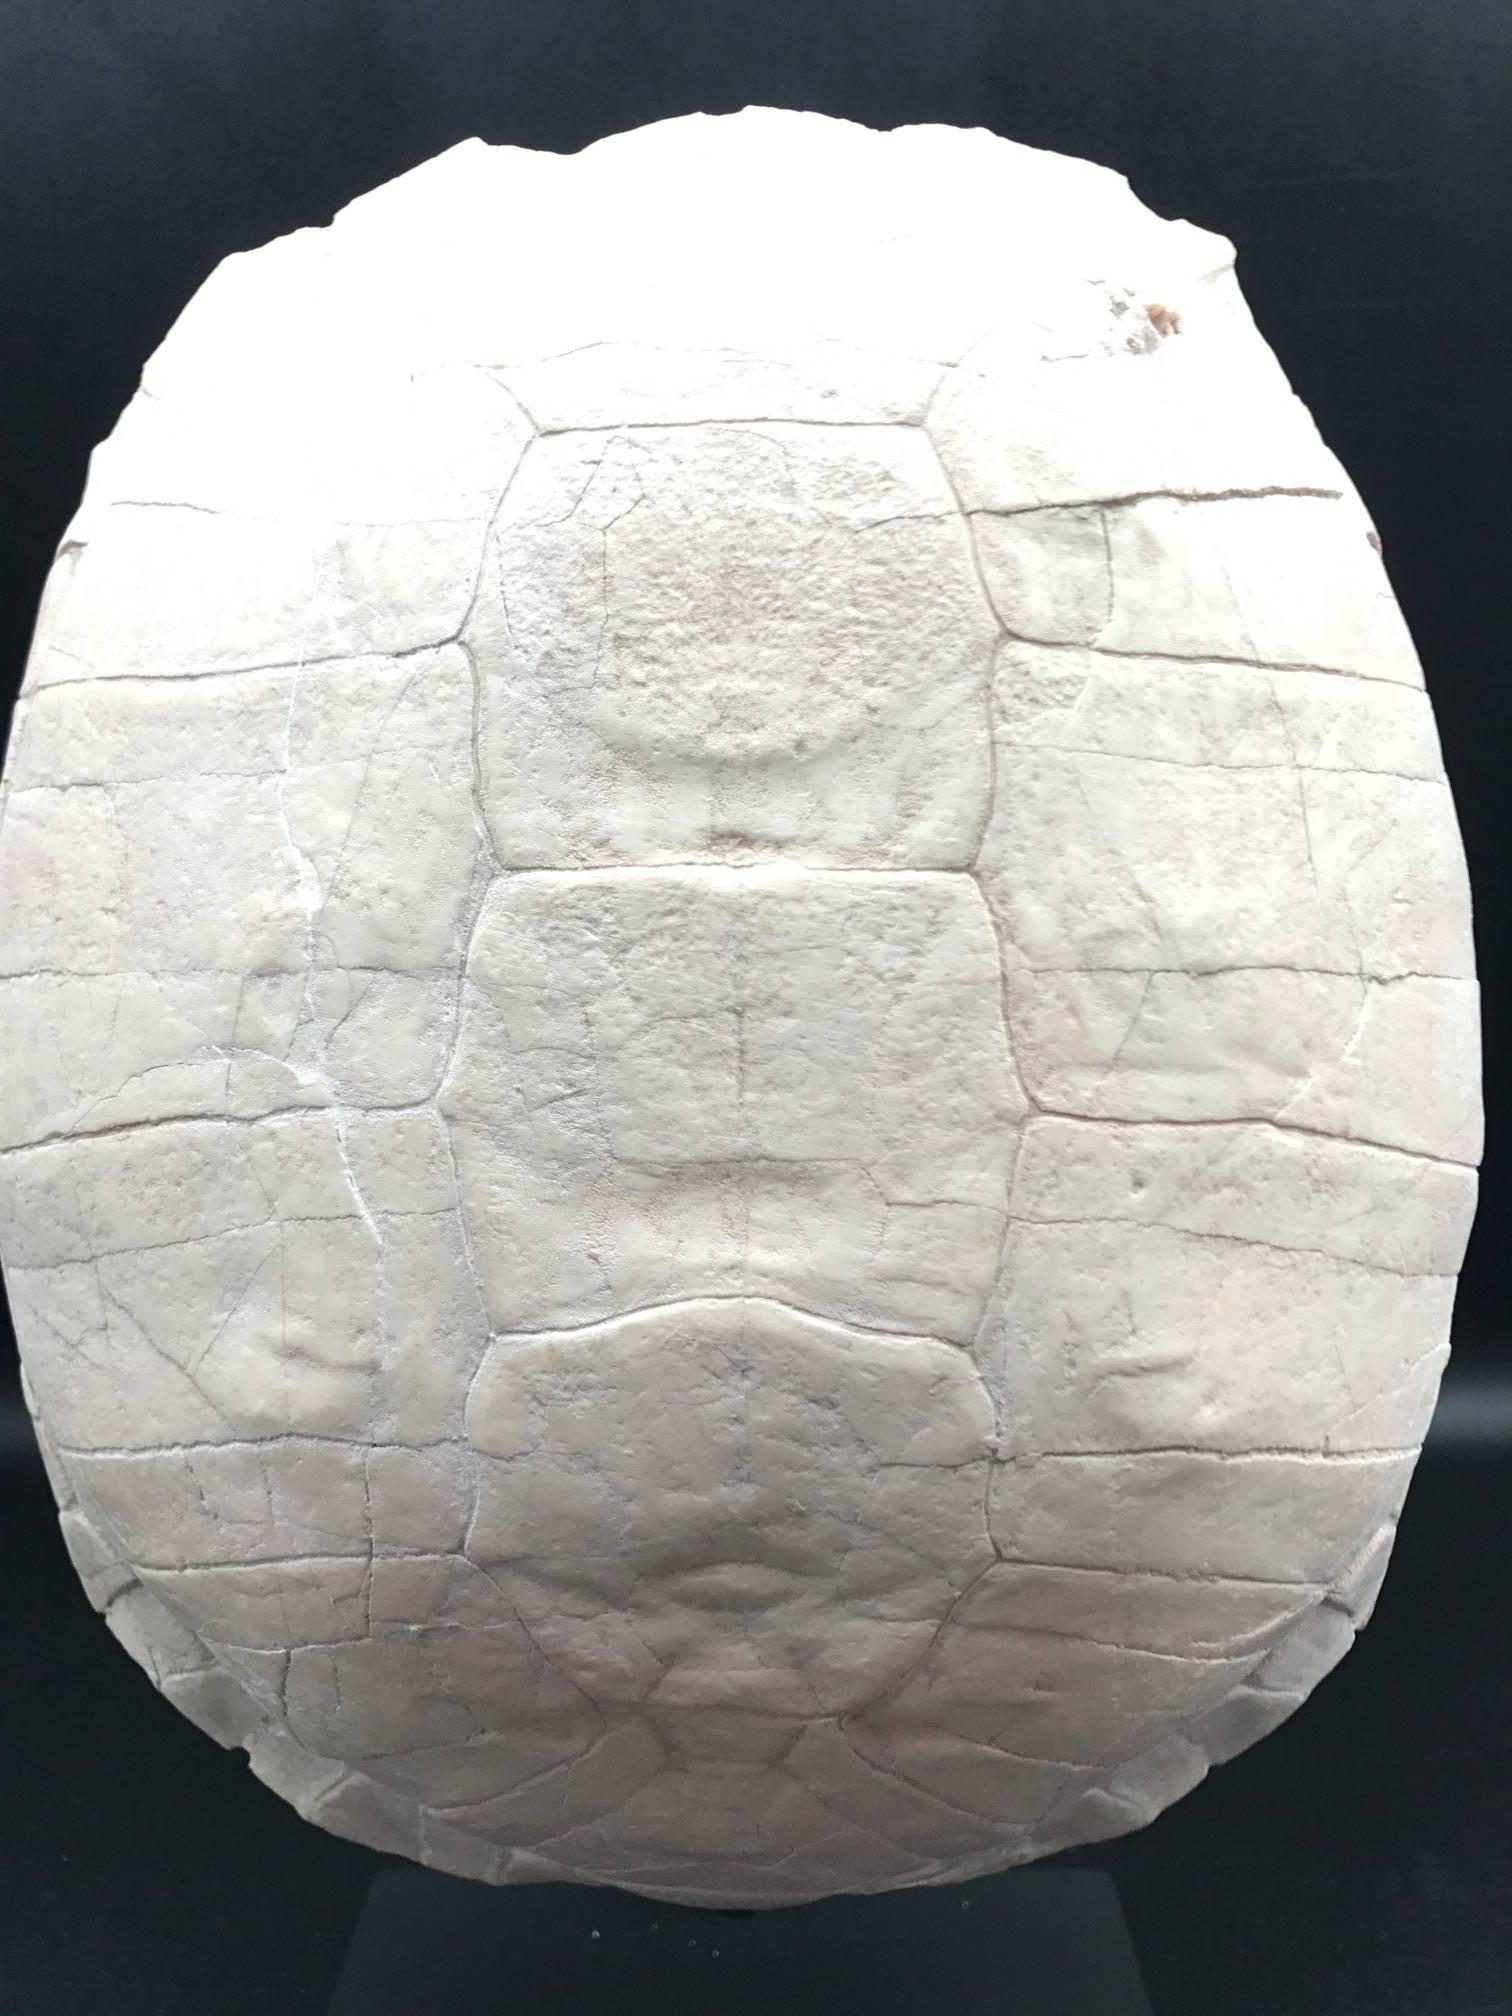 Turtle Fossil Stylemys Species from the Oligocene Era and Discovered in Dakota 2